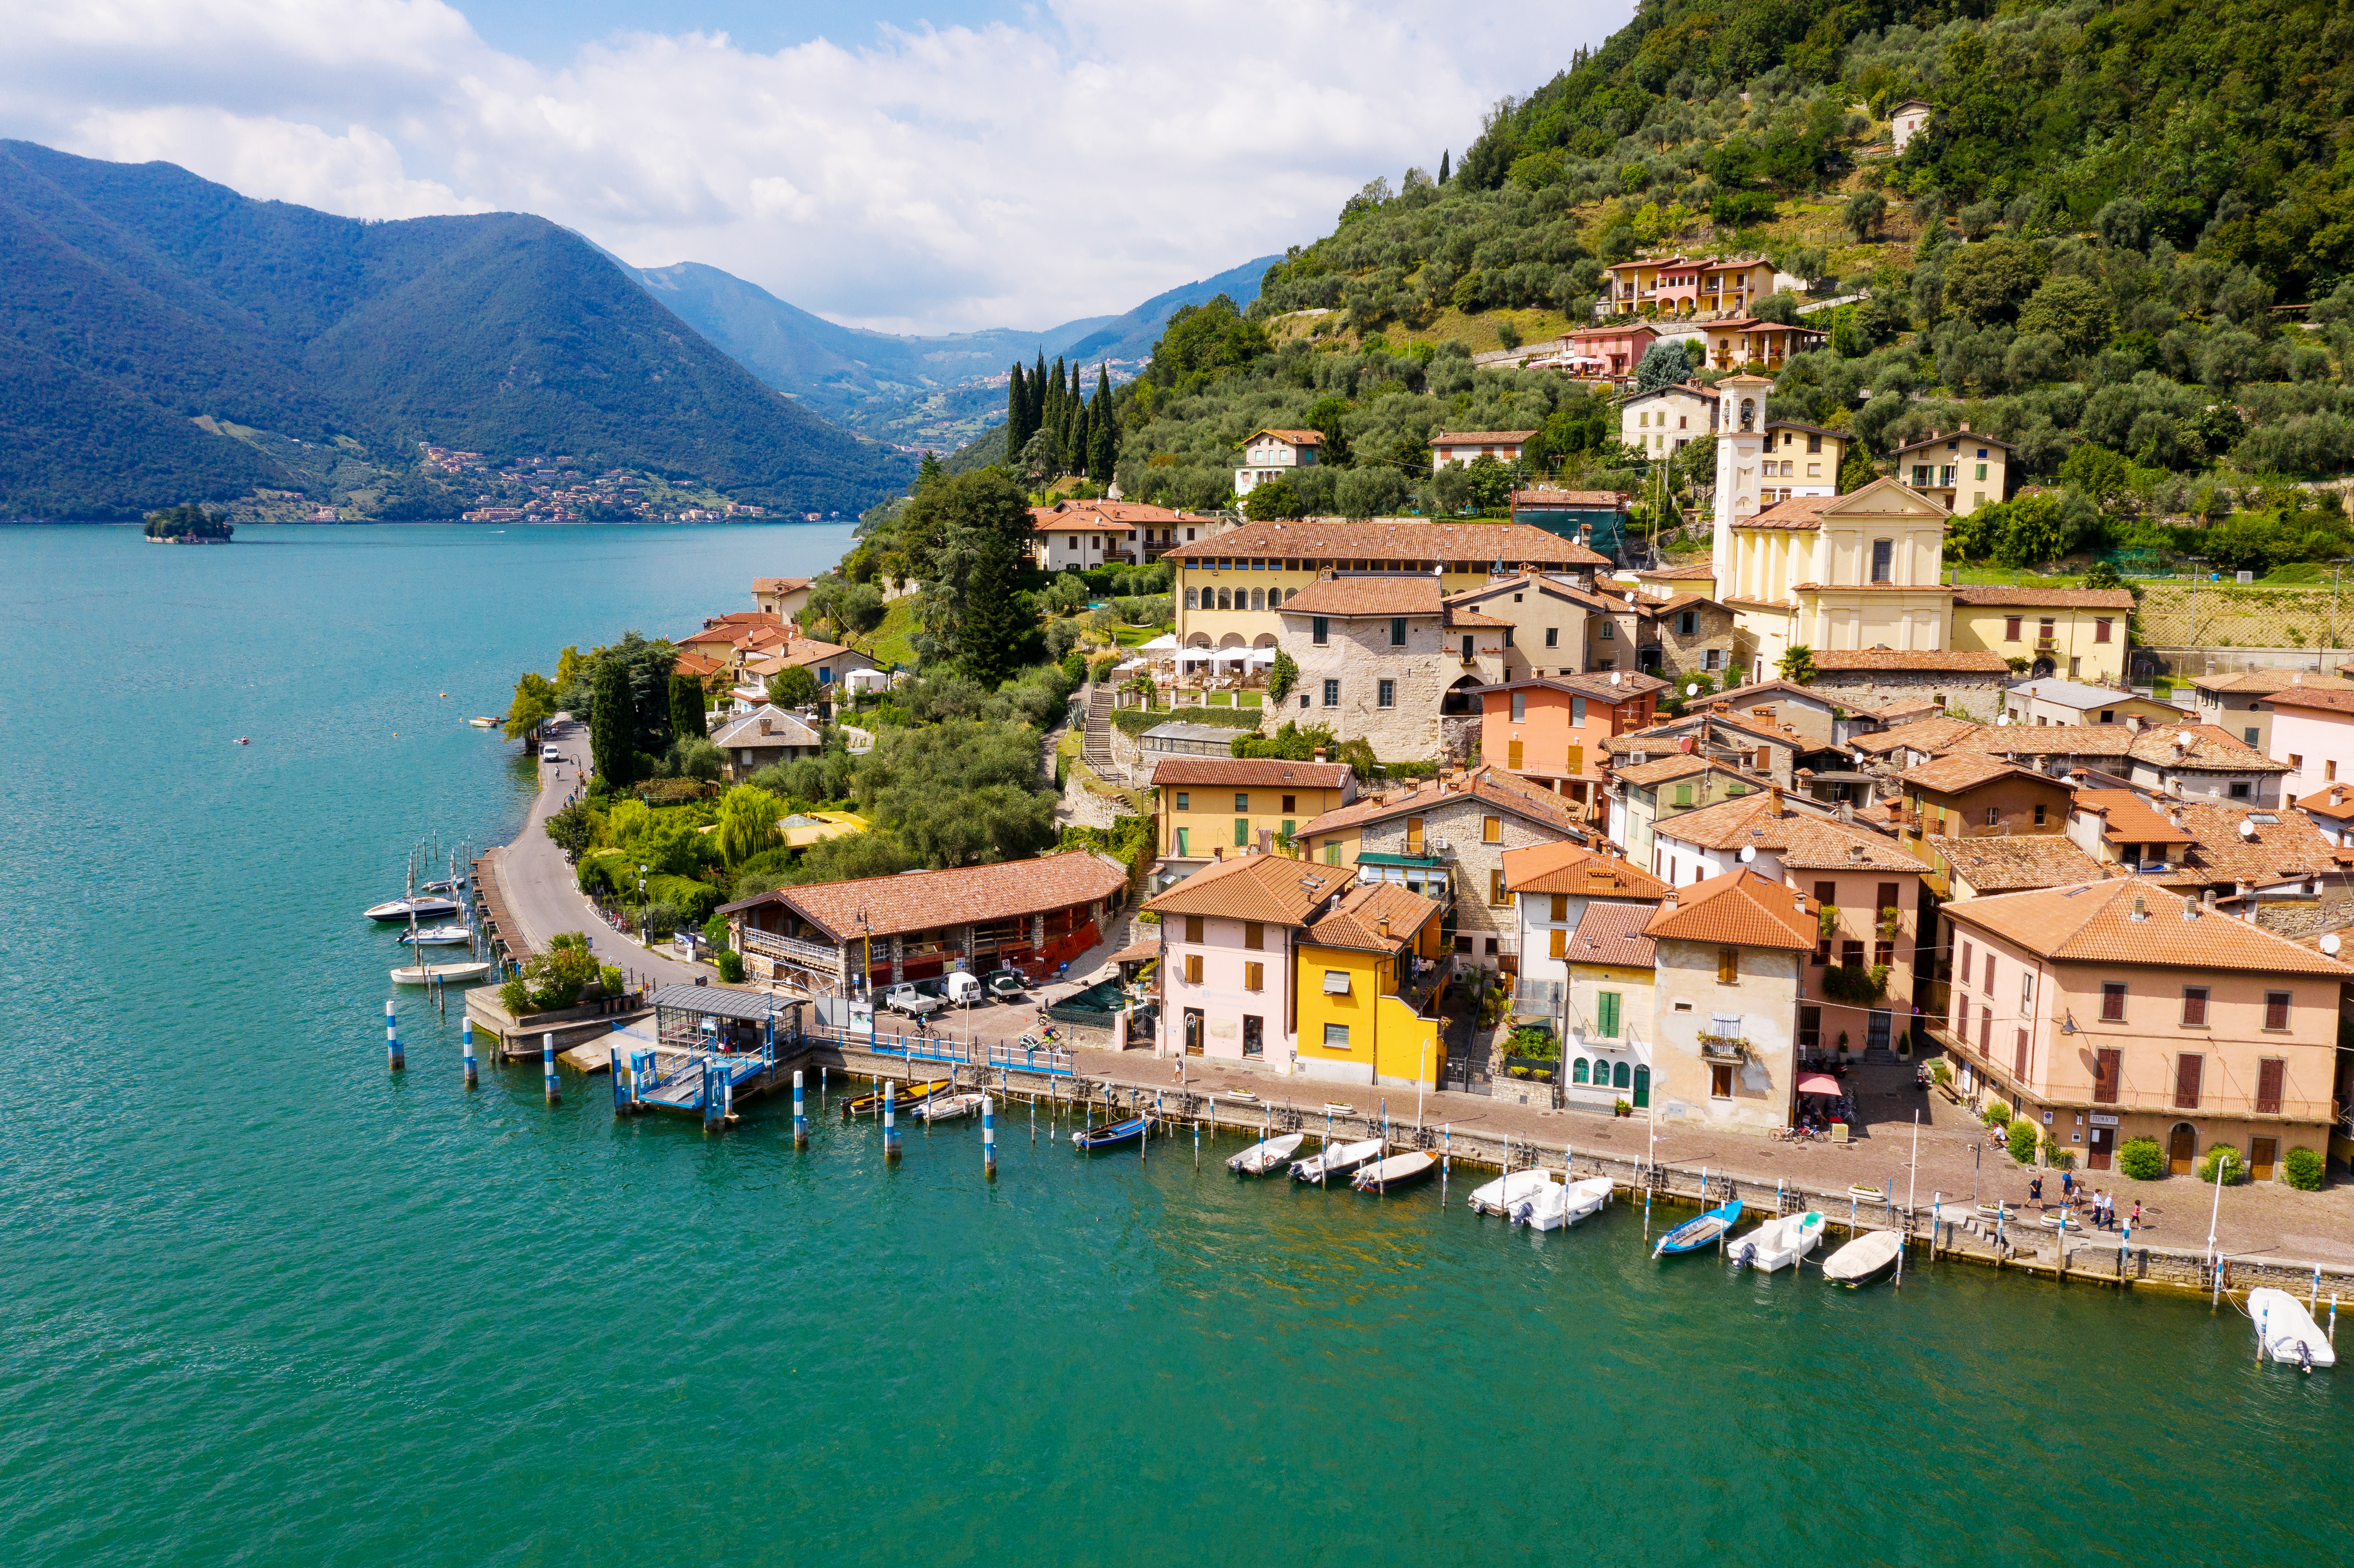 Must See Small Towns in Italy to Visit - Lake Iseo